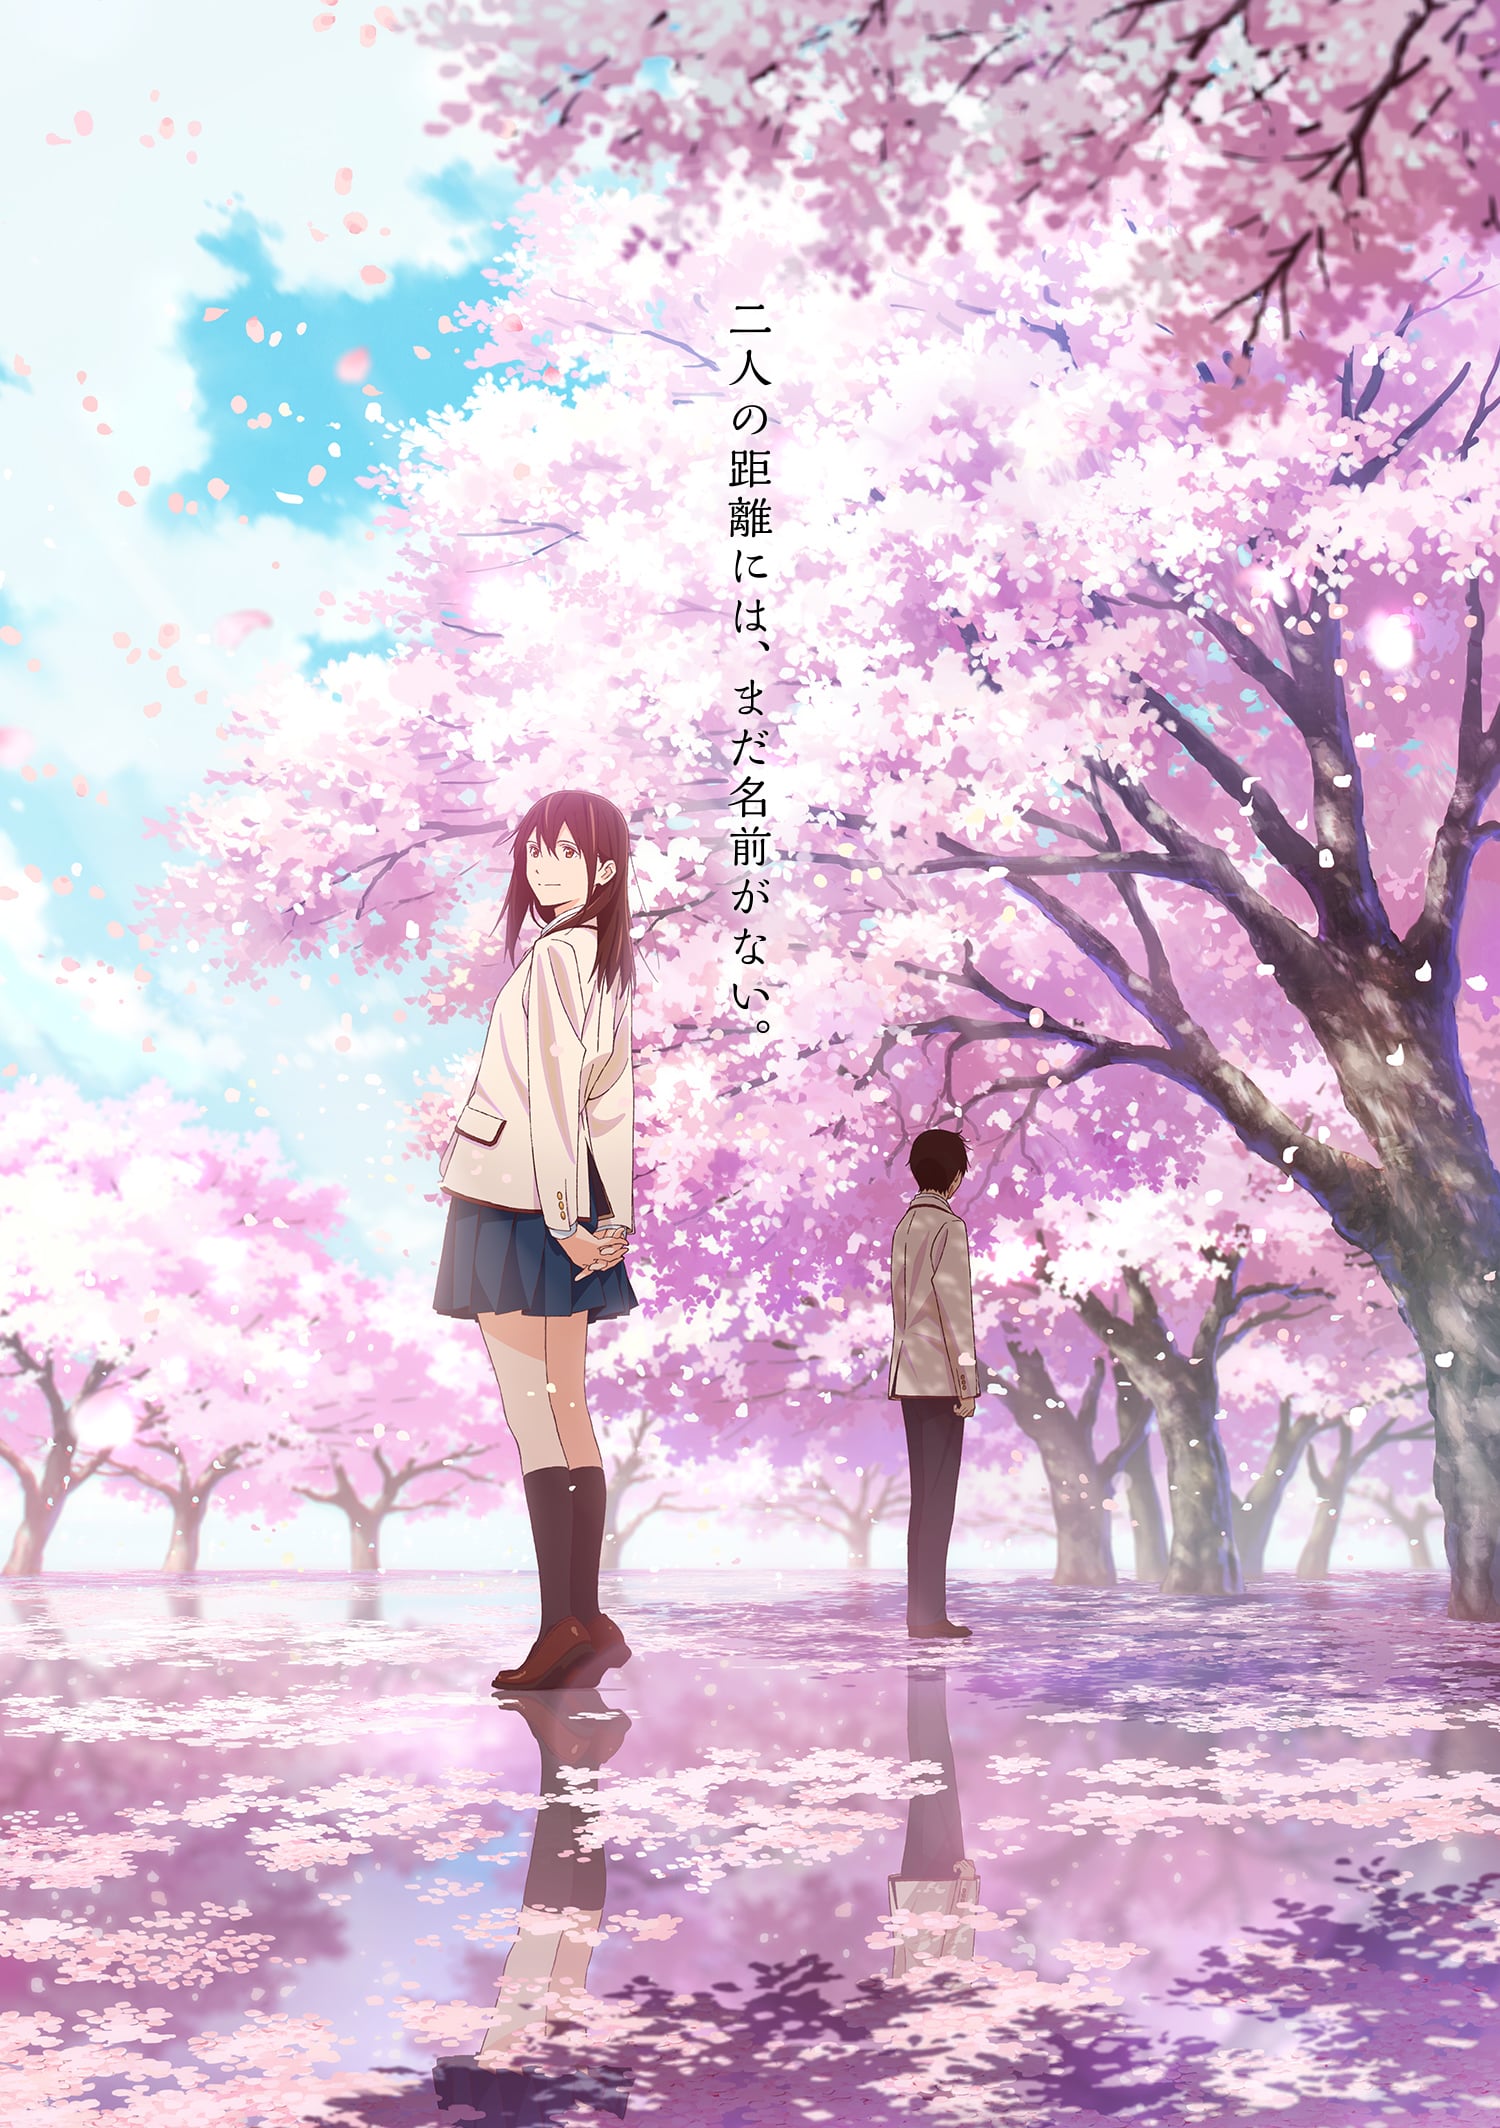 Let Me Eat Your Pancreas (2018) Picture - Image Abyss